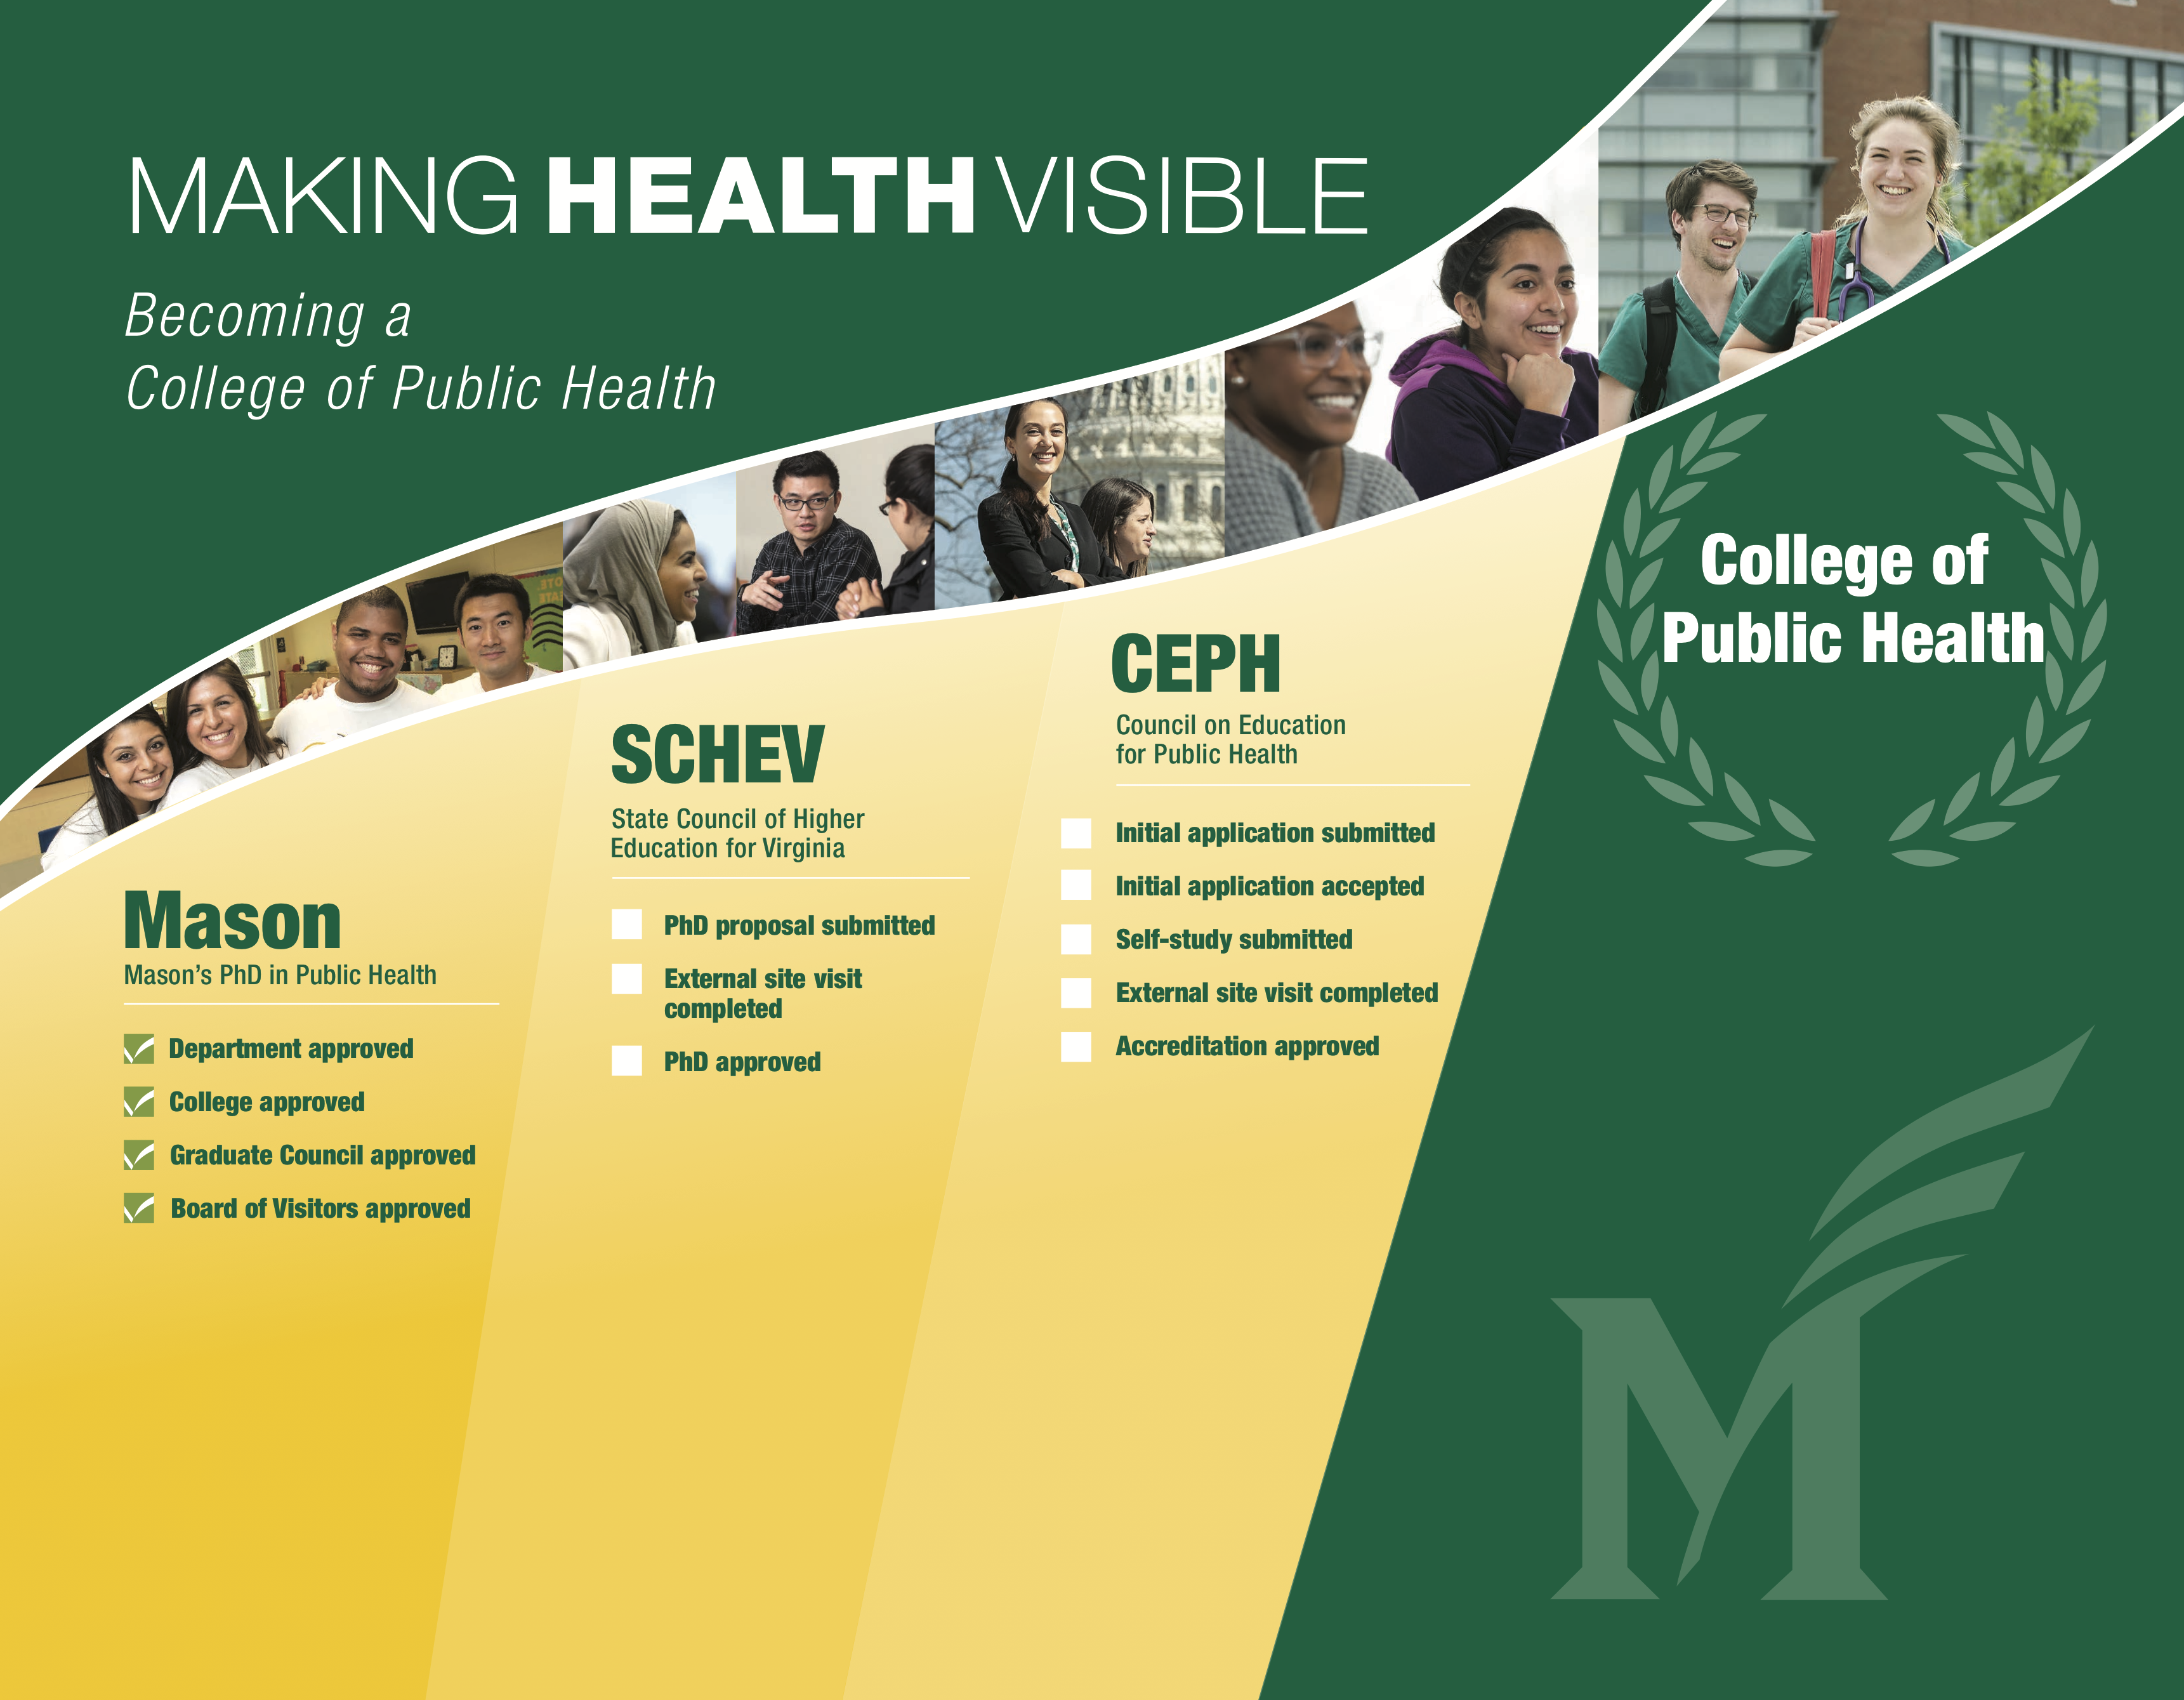 Timeline to becoming a College of Public Health